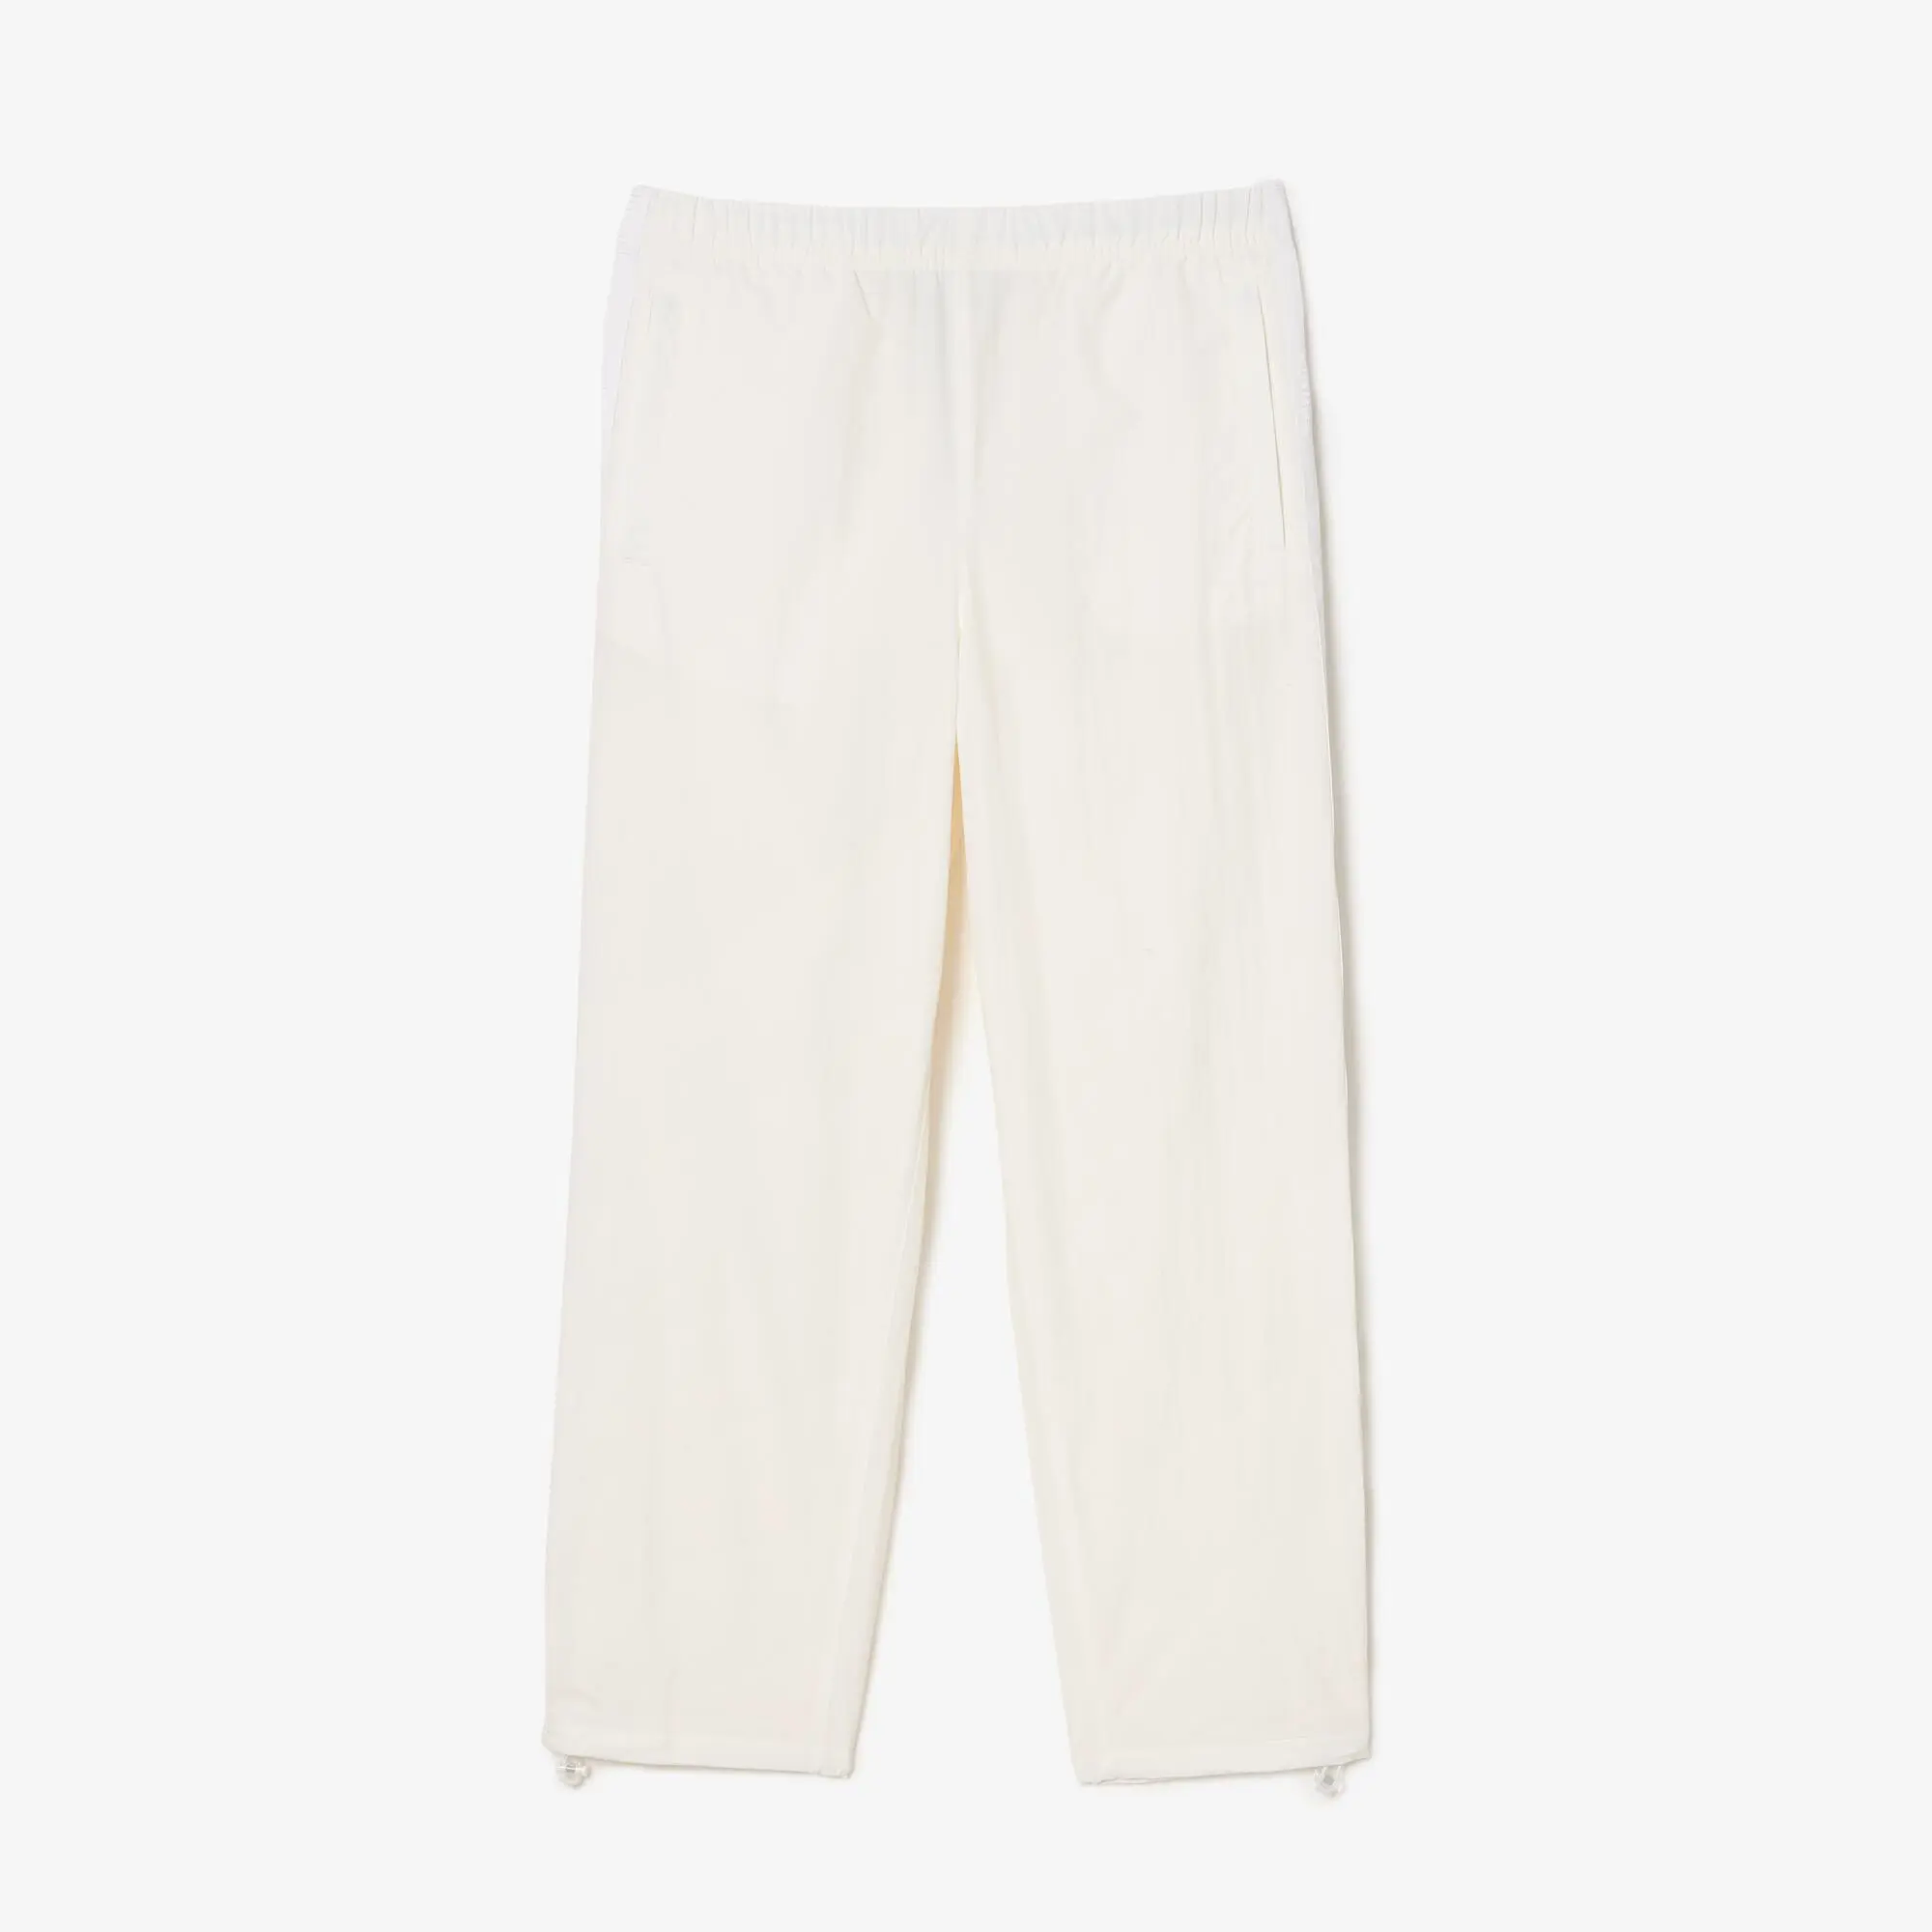 Lacoste Men's Relaxed Fit Striped Pants. 2